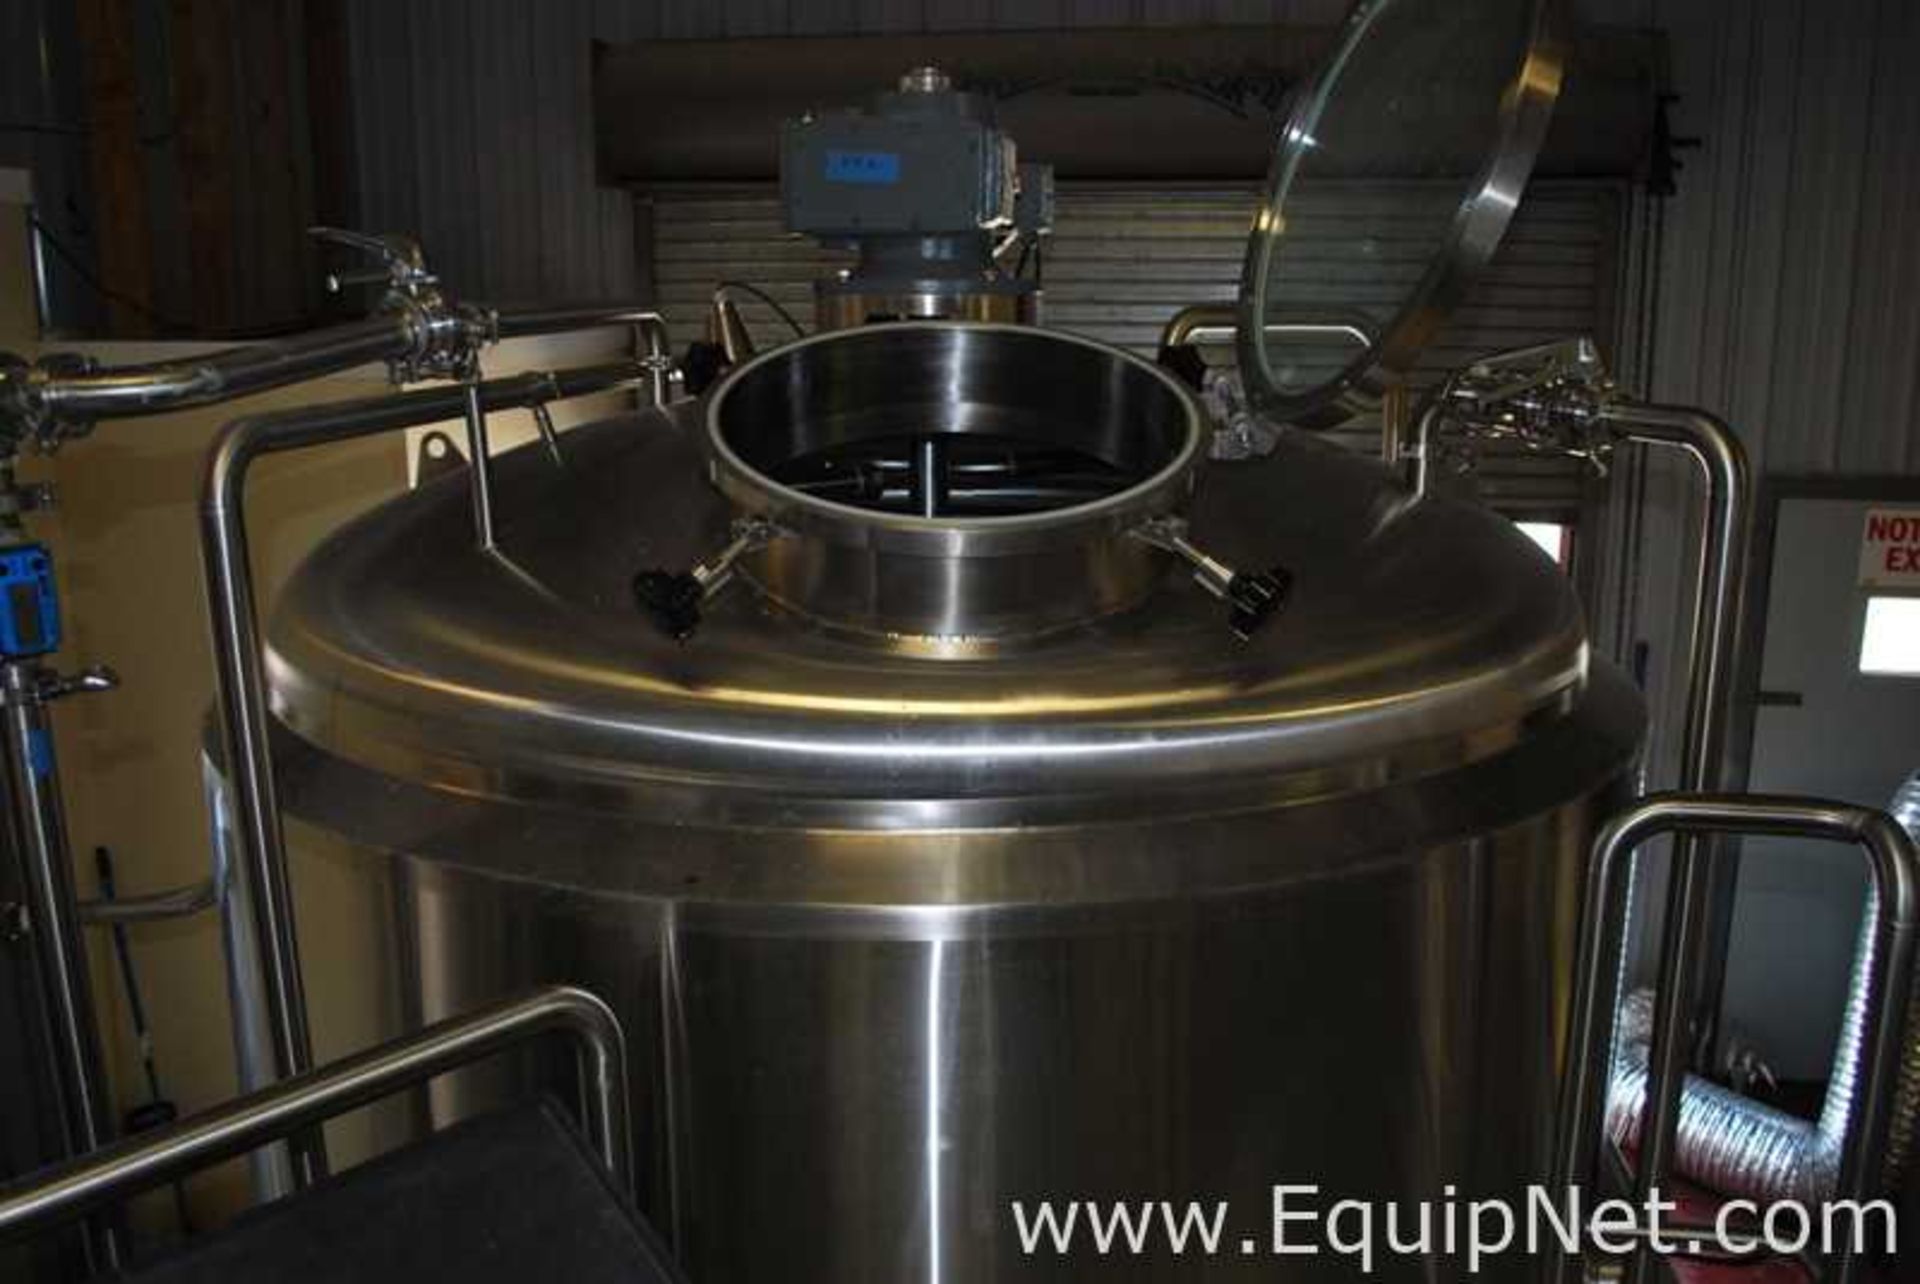 Brew House Sytem with Three- 20 BBL Vessels Mash Tun|Lauter Tun|Whirlpool-Boil Kettle - Image 5 of 10